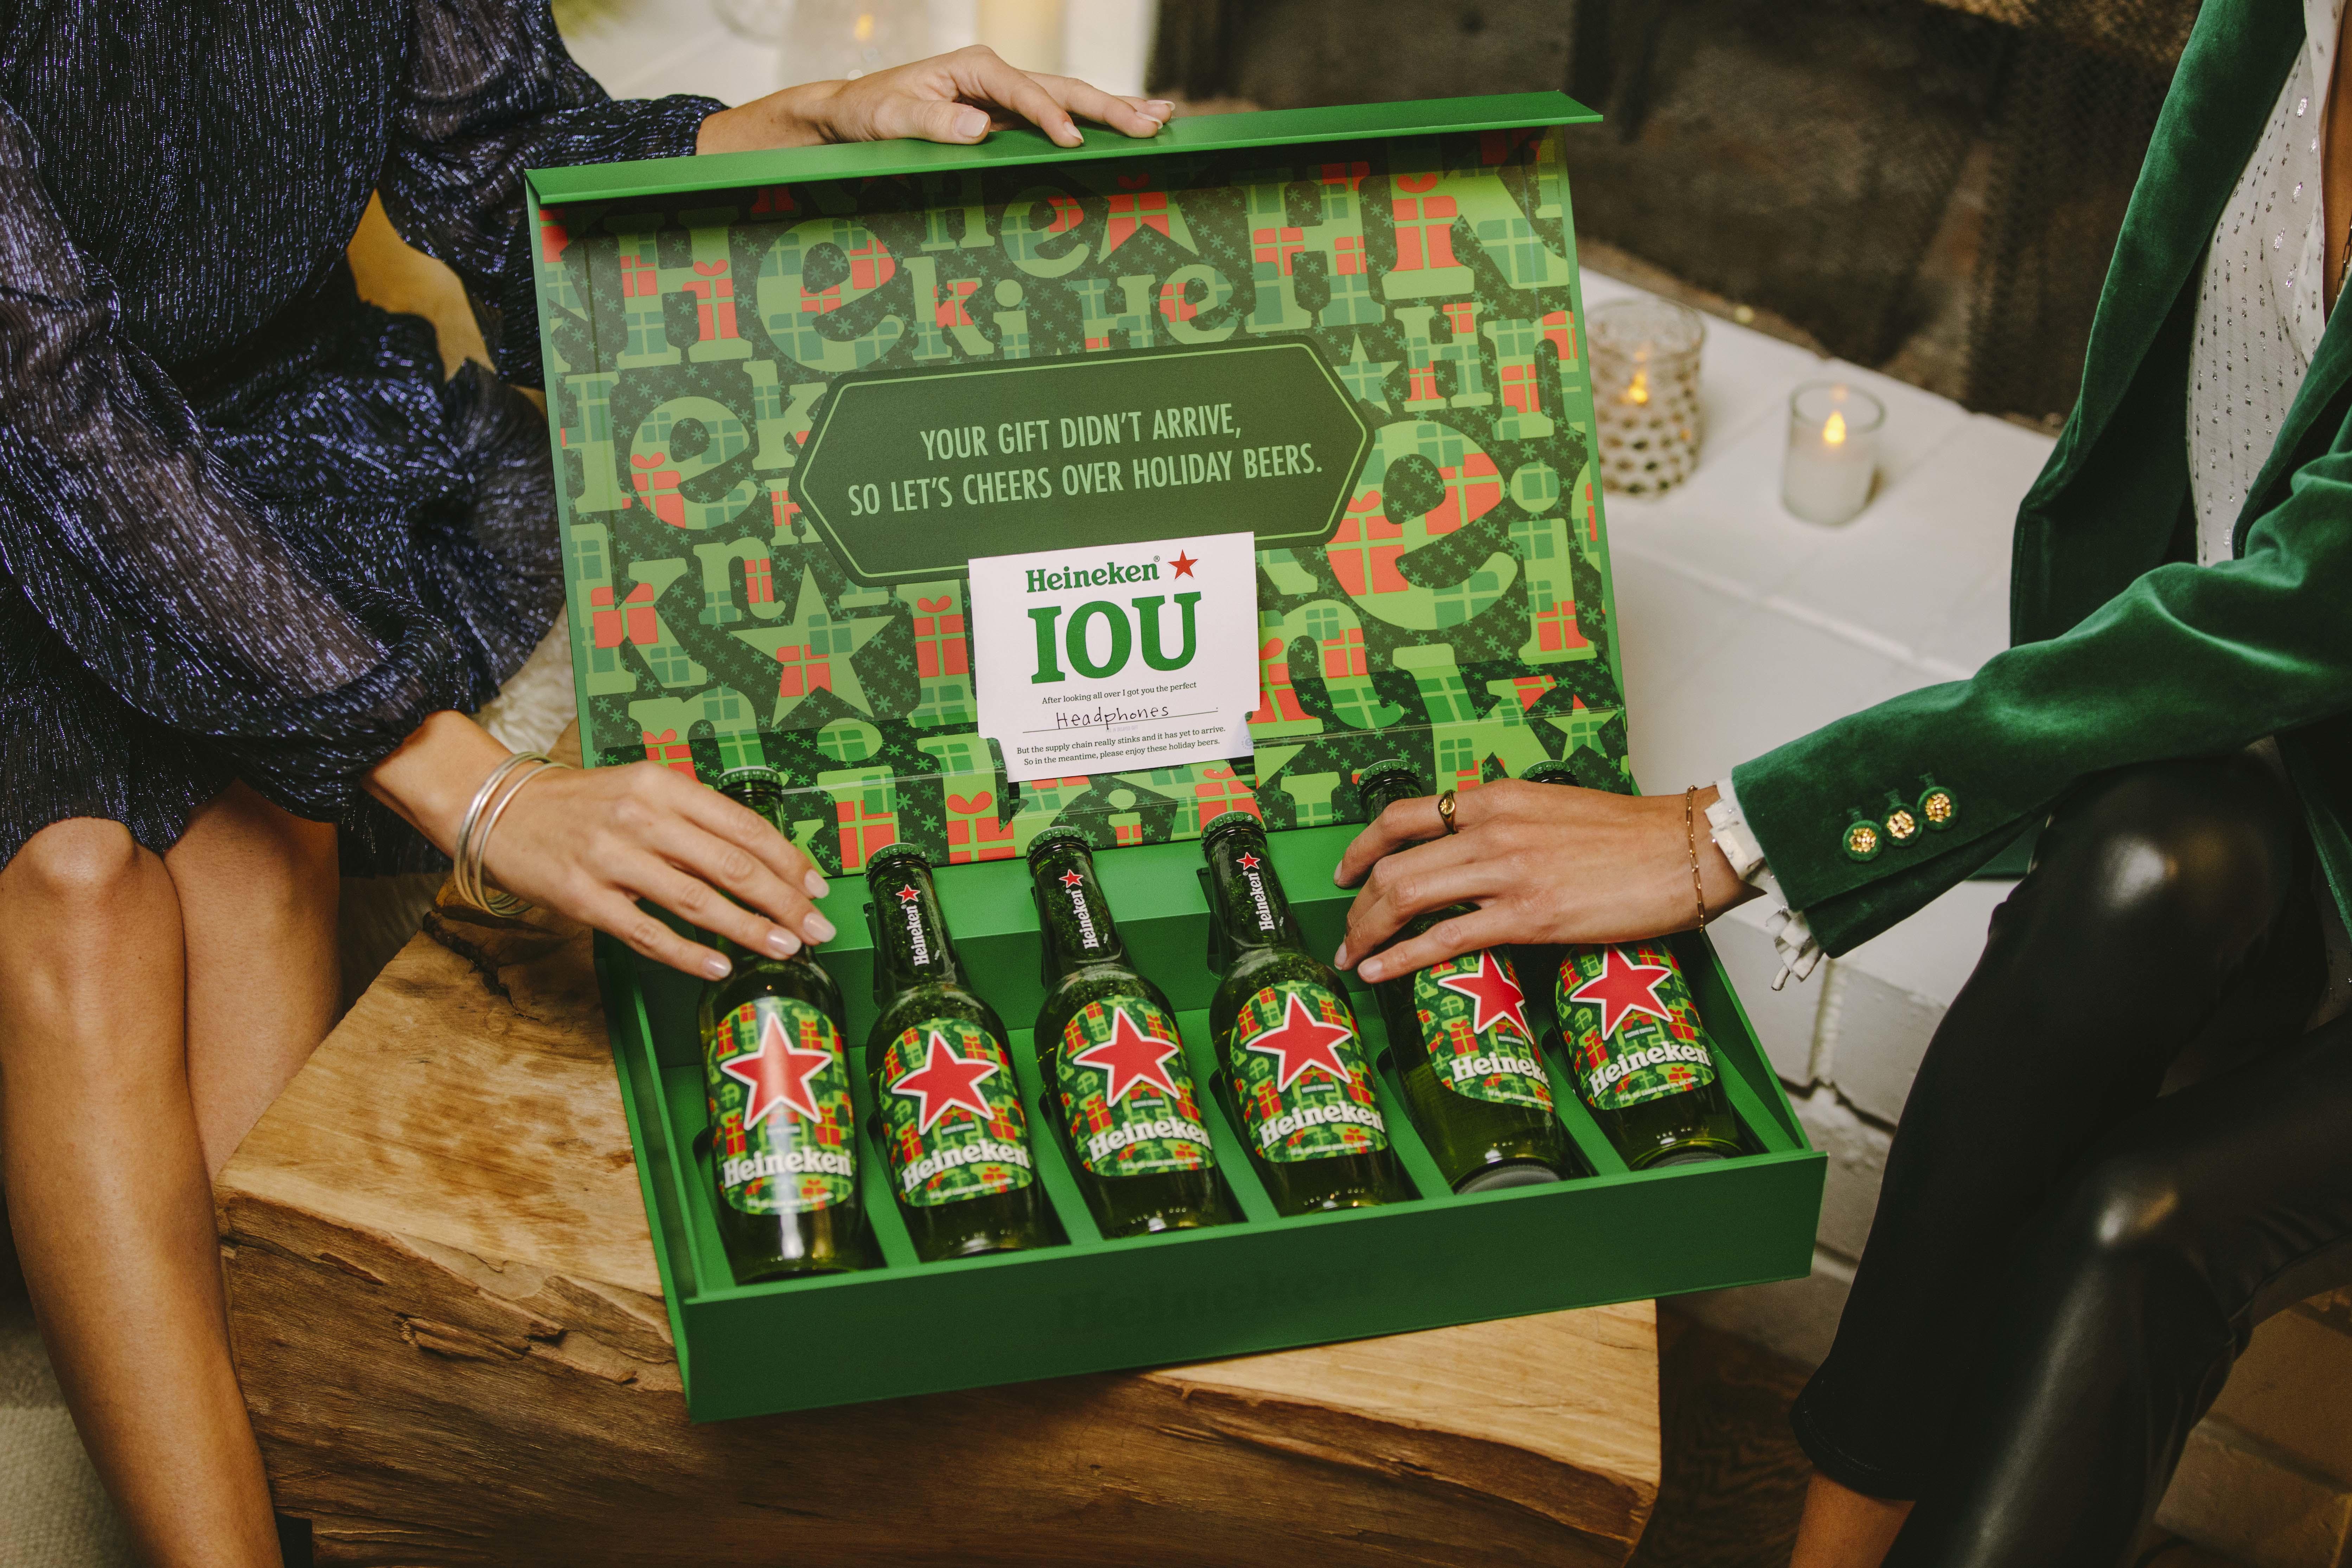 Holiday gift out of stock? Heineken to offer free beer "IOU"